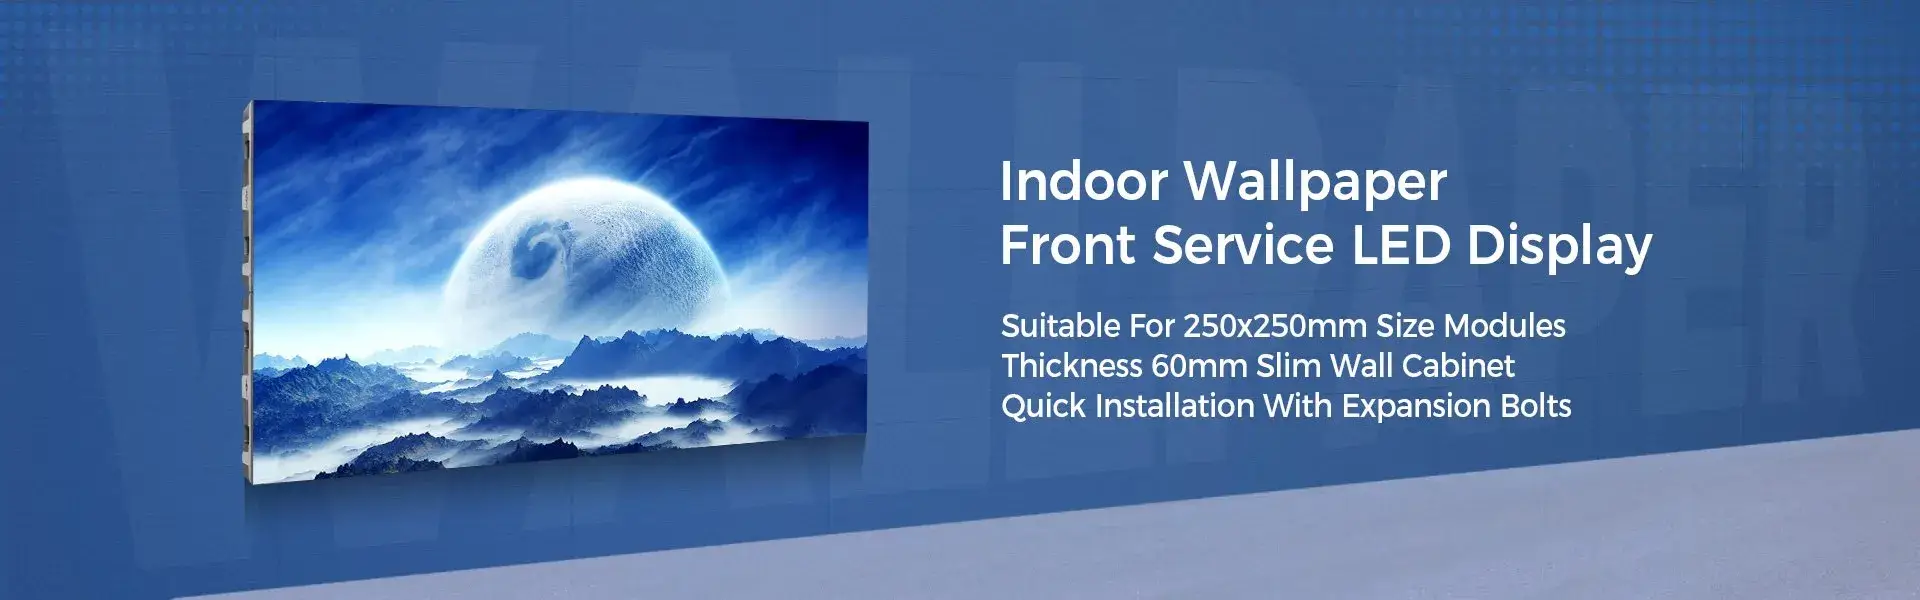 Indoor Wallpaper Front Service LED Display 1000×500 and 500×500